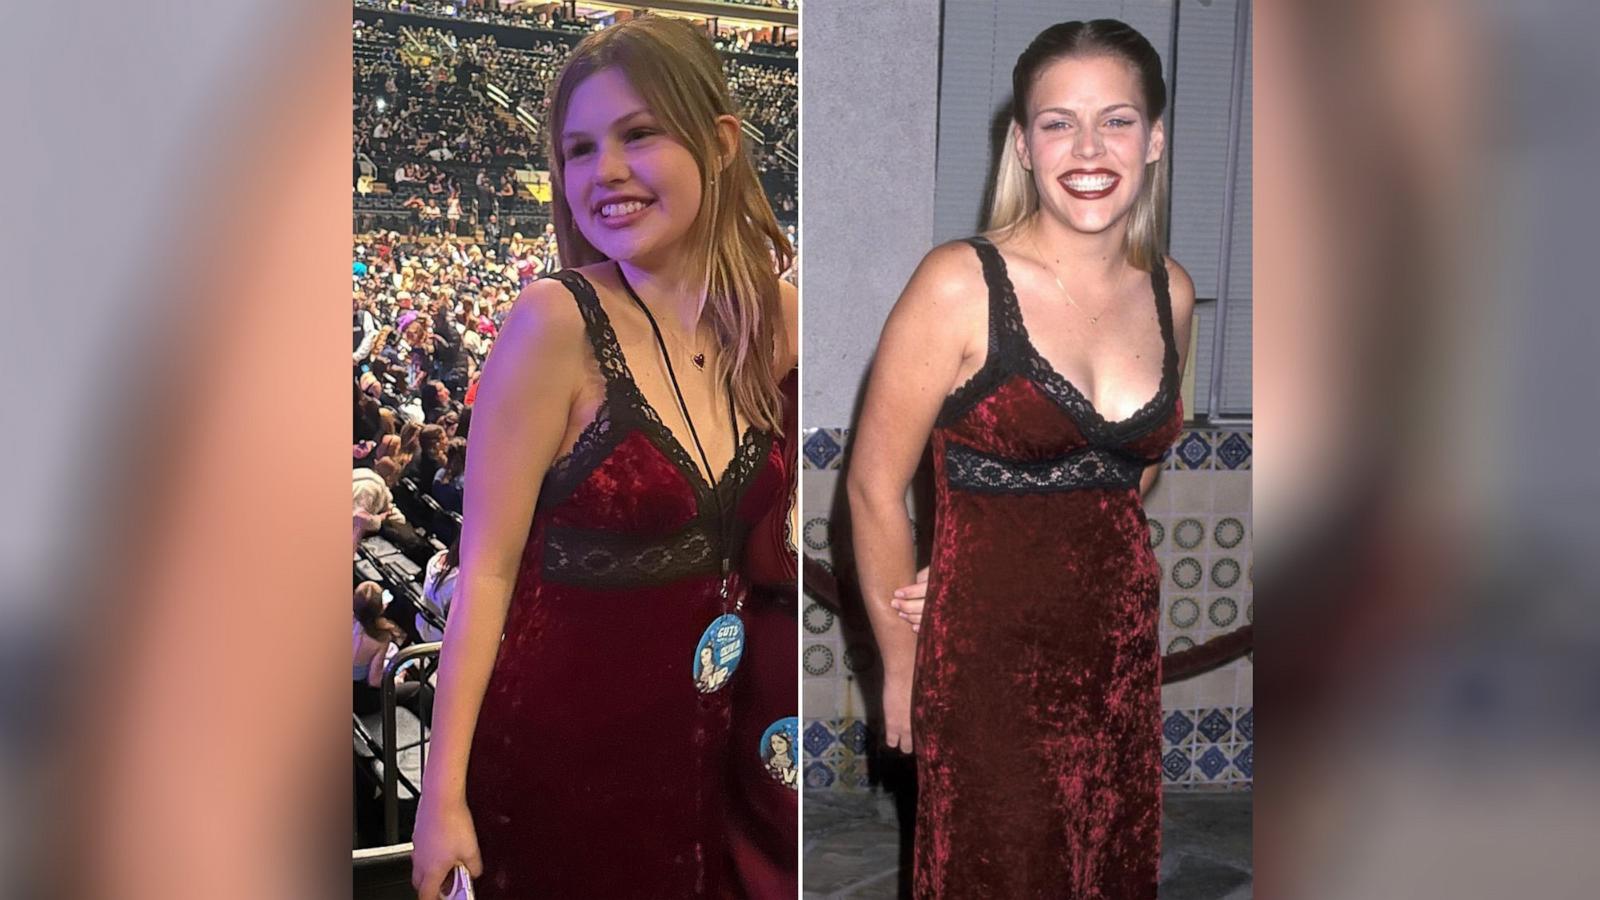 PHOTO: In a photo posted to her Instgagram, Busy Philipps shares a picture of her daughter Birdie wearing Busy's dress from the 90's to an Olivia Rodrigo concert.